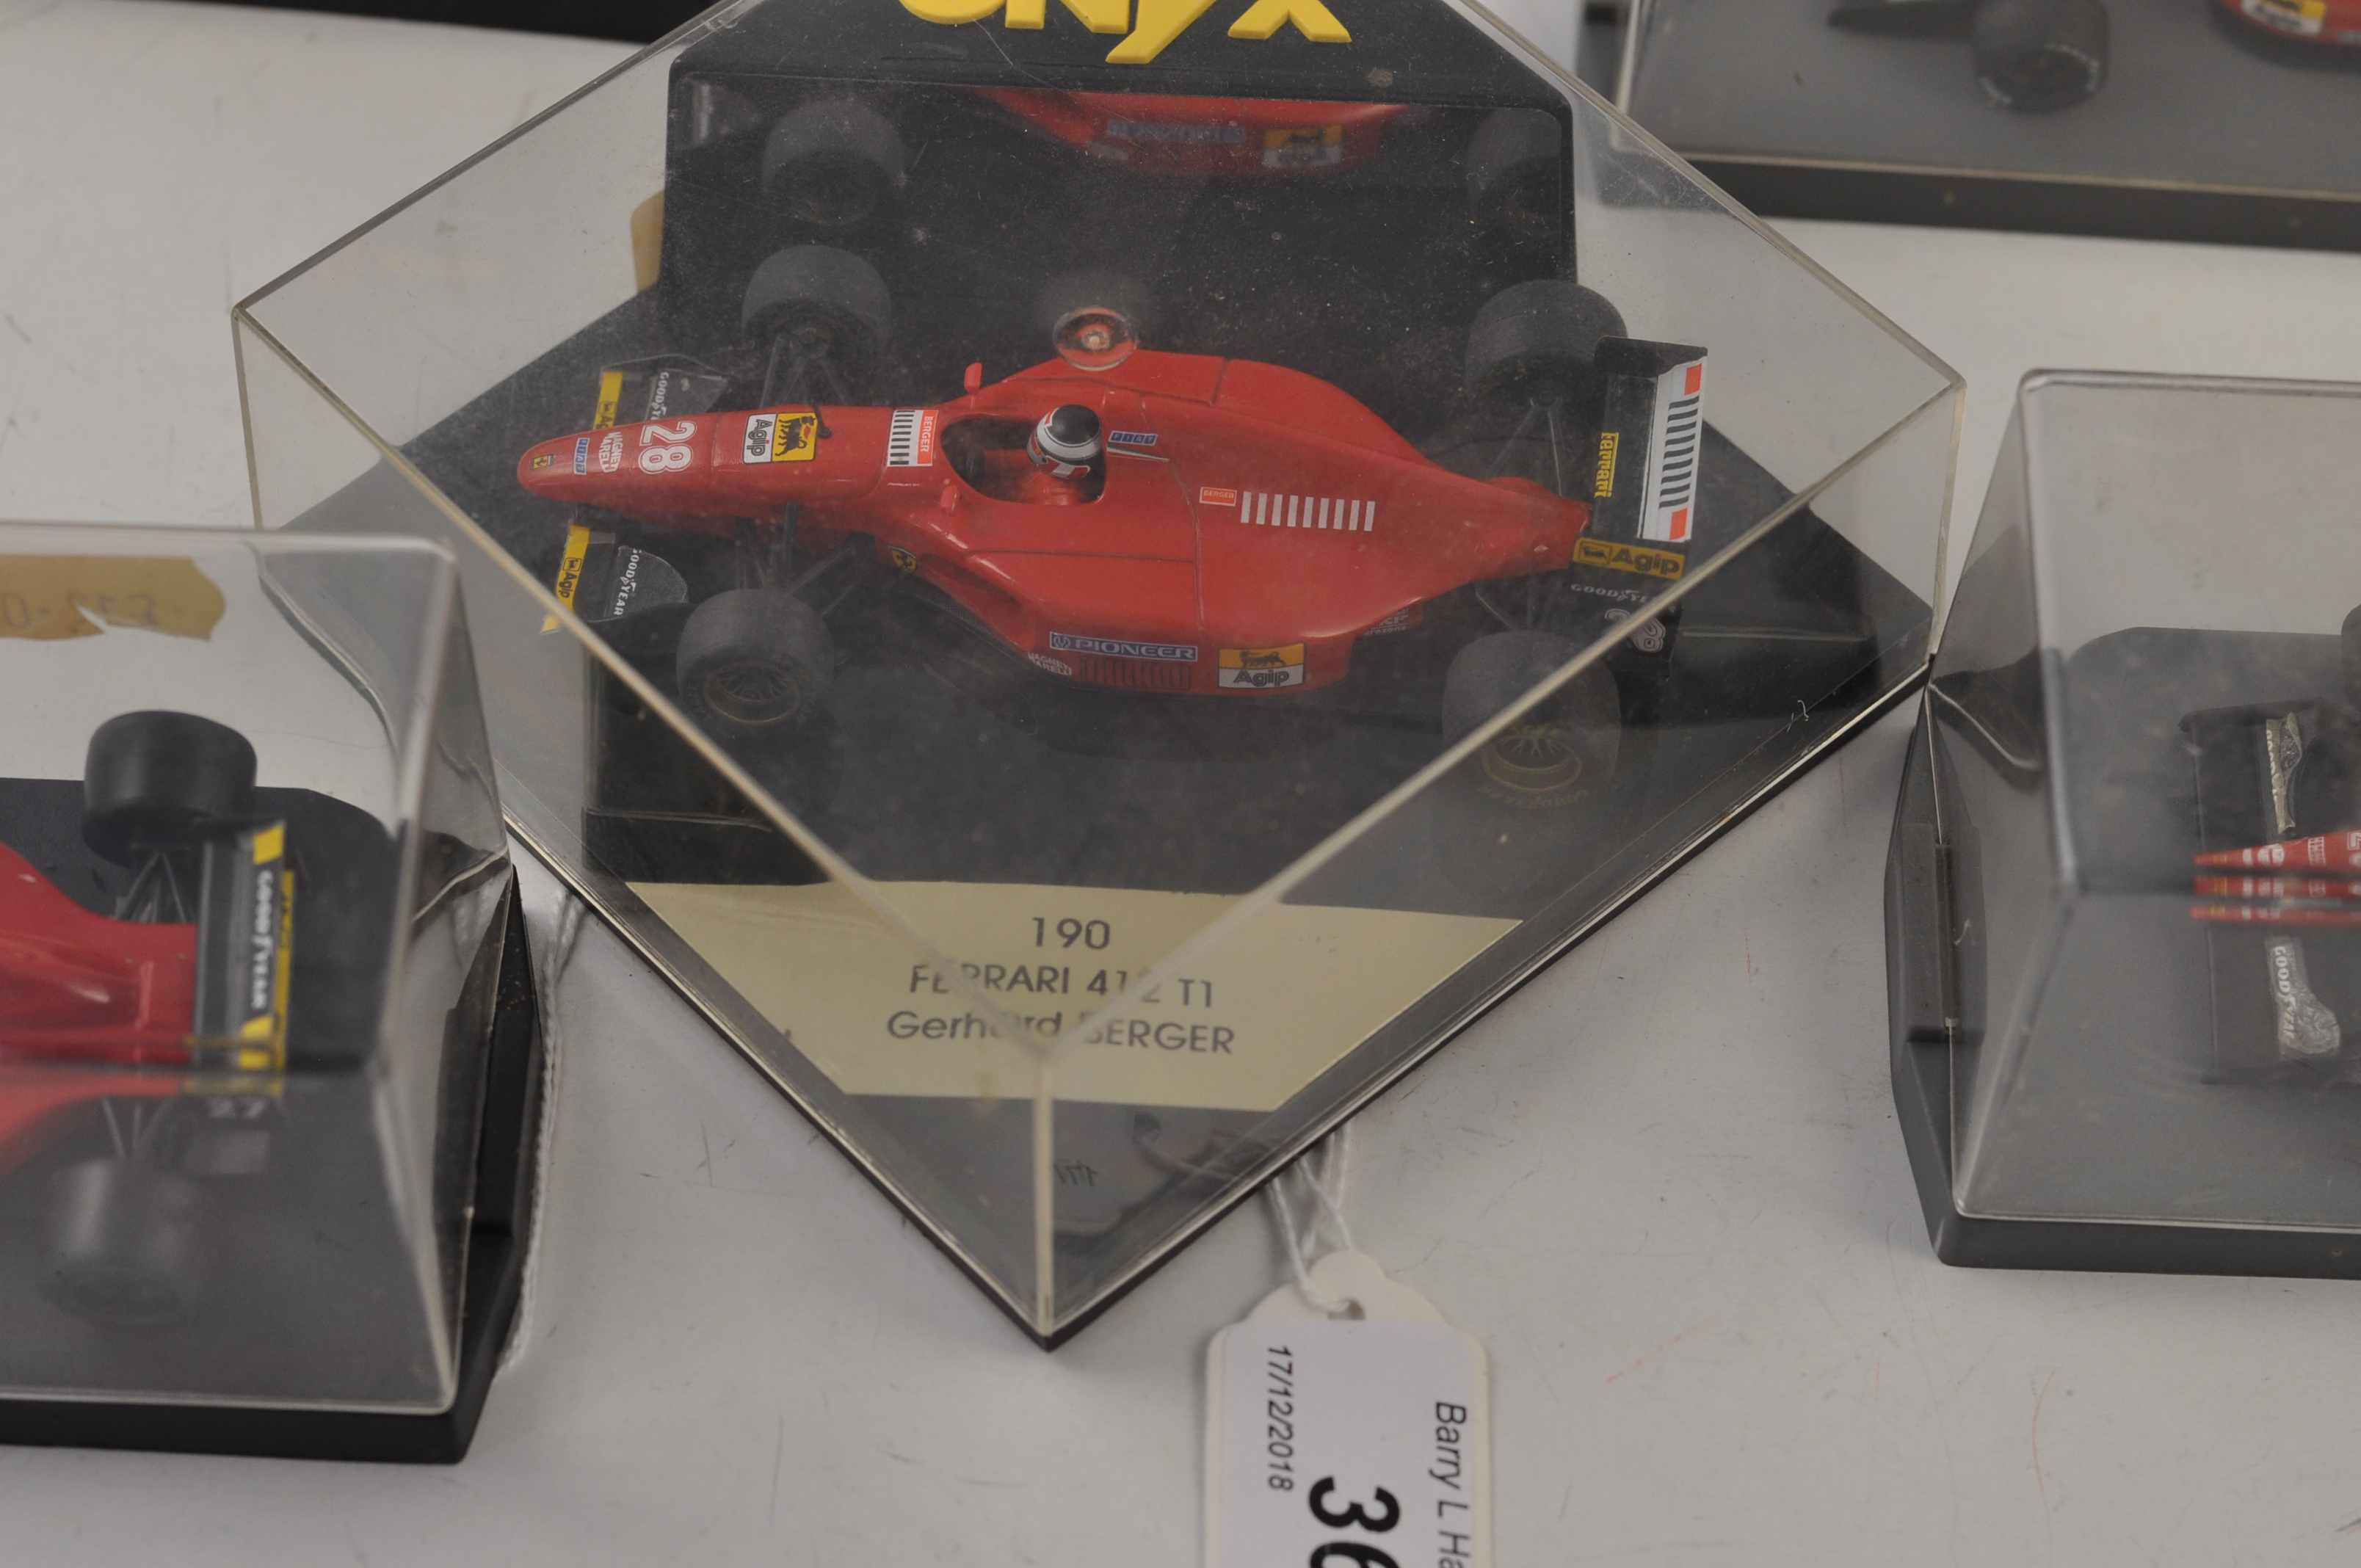 COLLECTION OF 5 ONYX FERRARI F1 MODELS IN PRESENTATION CASES - Image 2 of 2